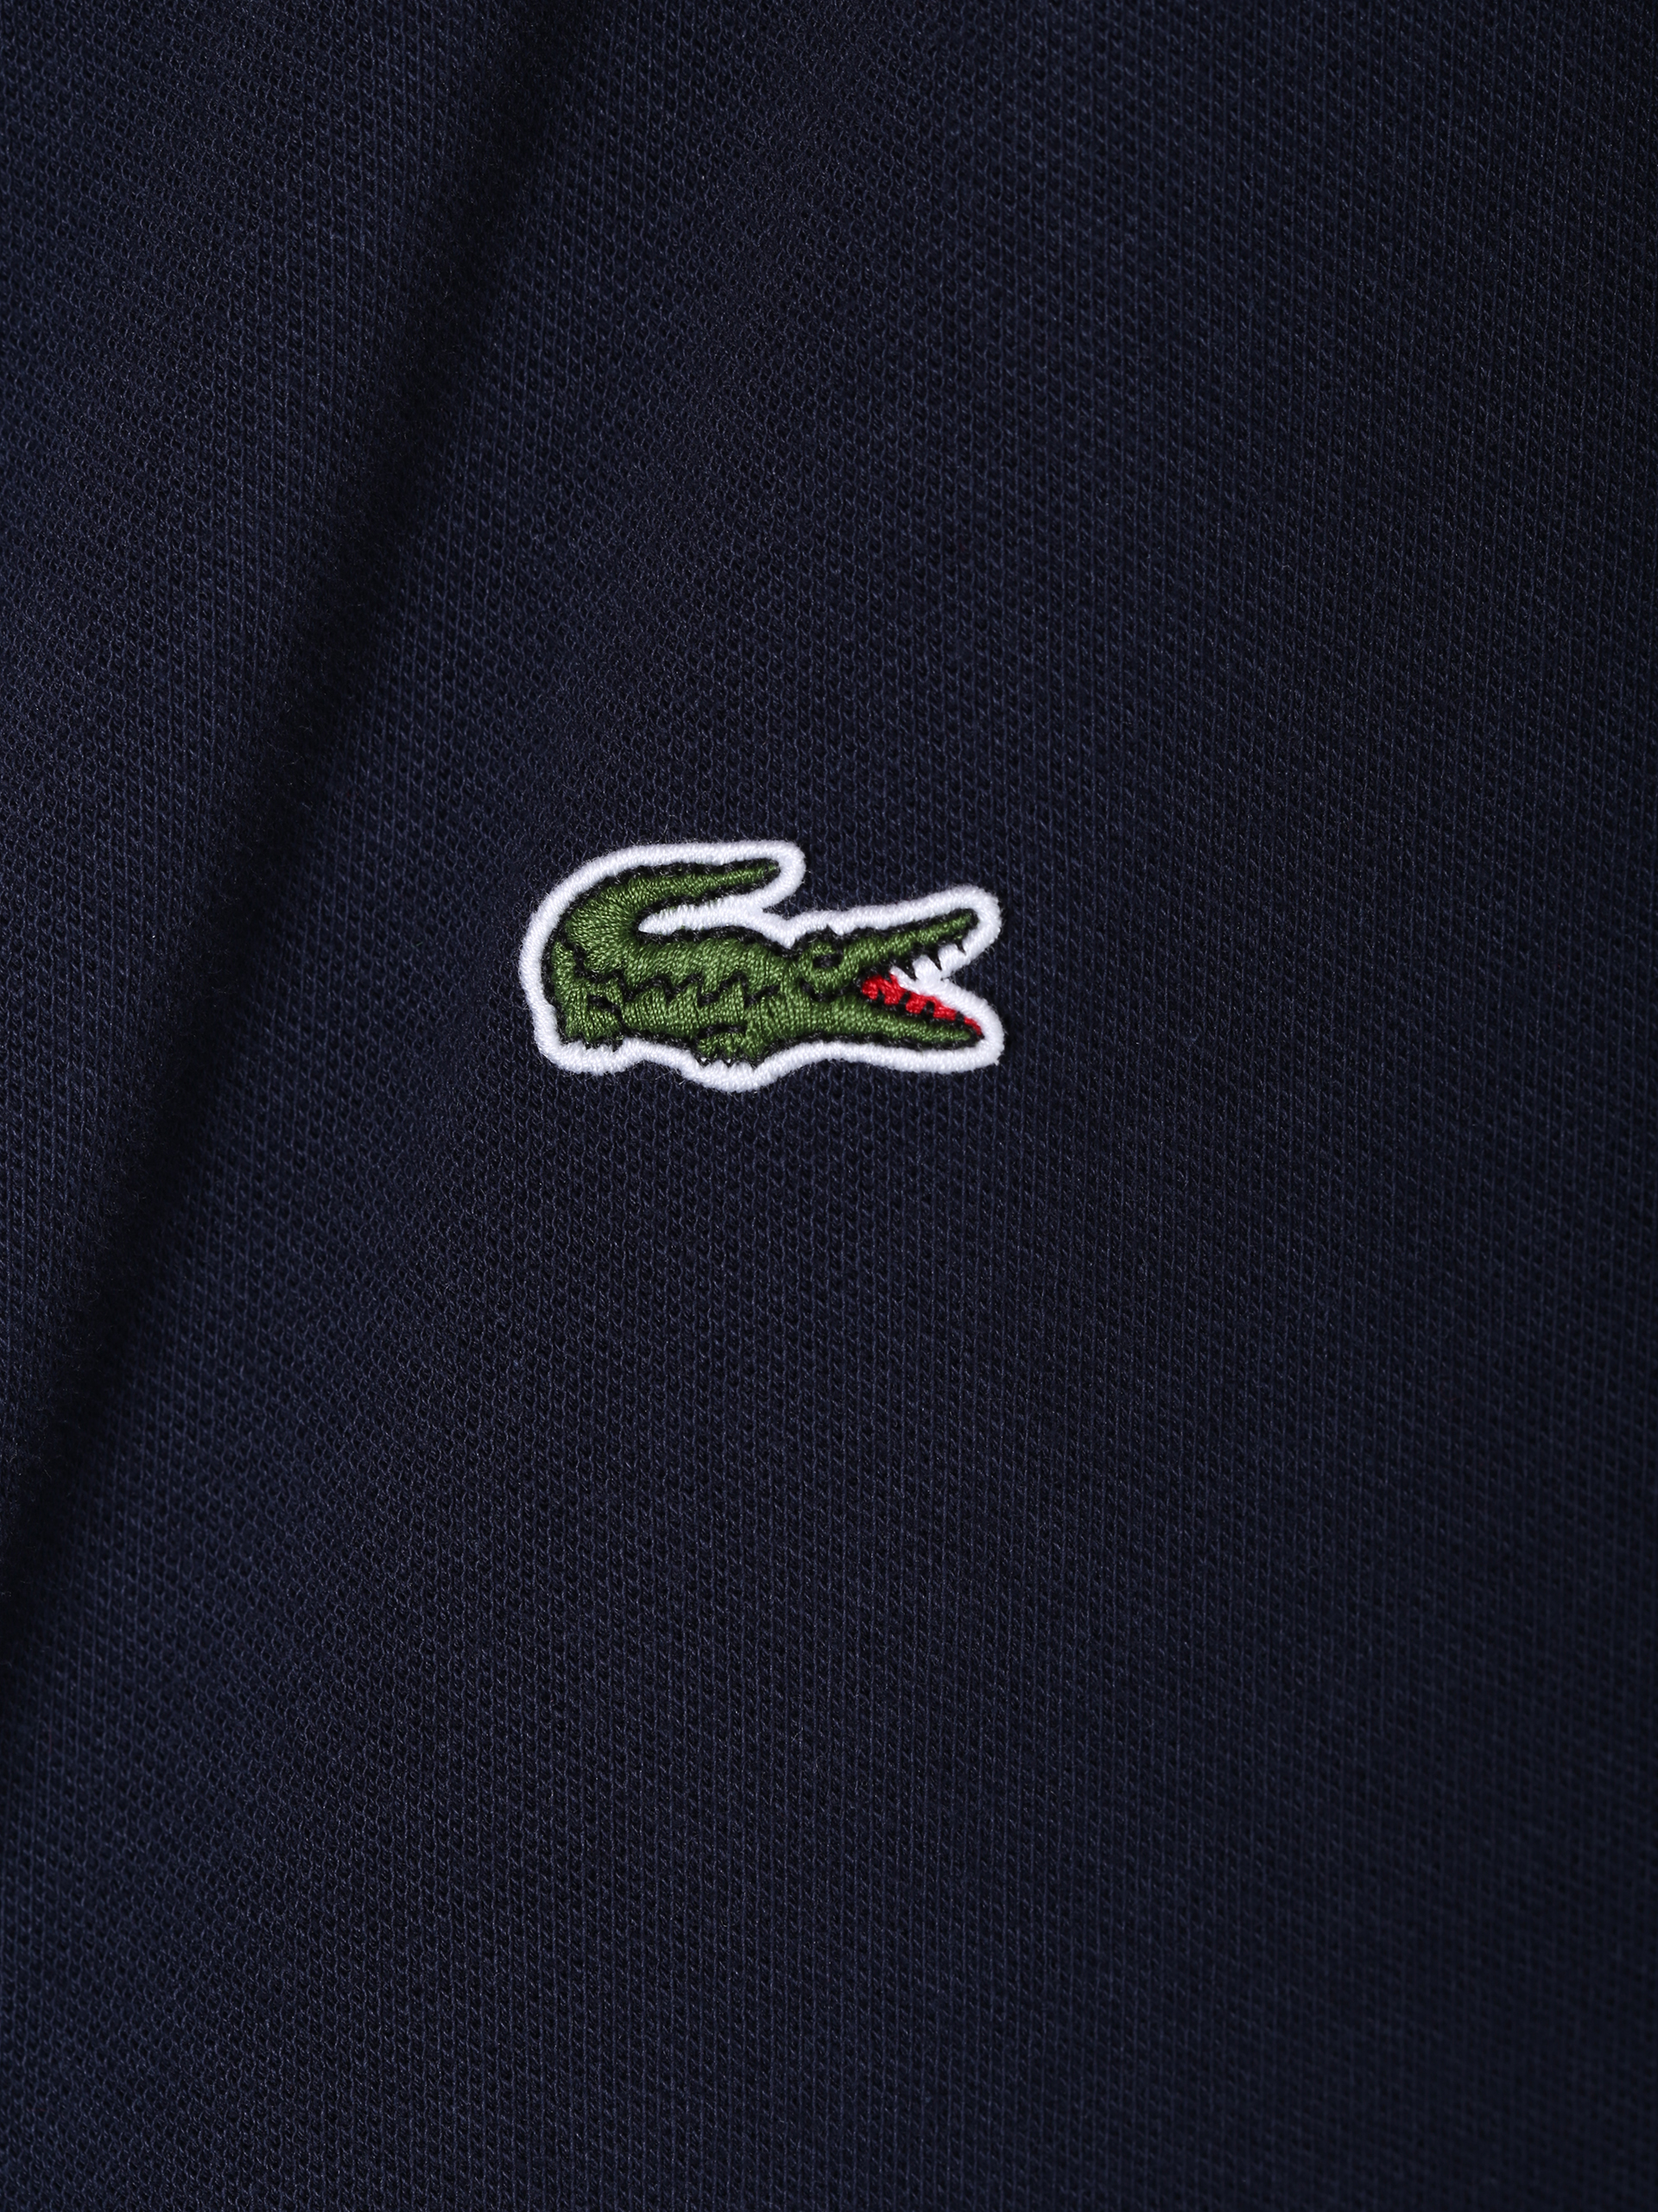 LACOSTE Shirt in Marine 